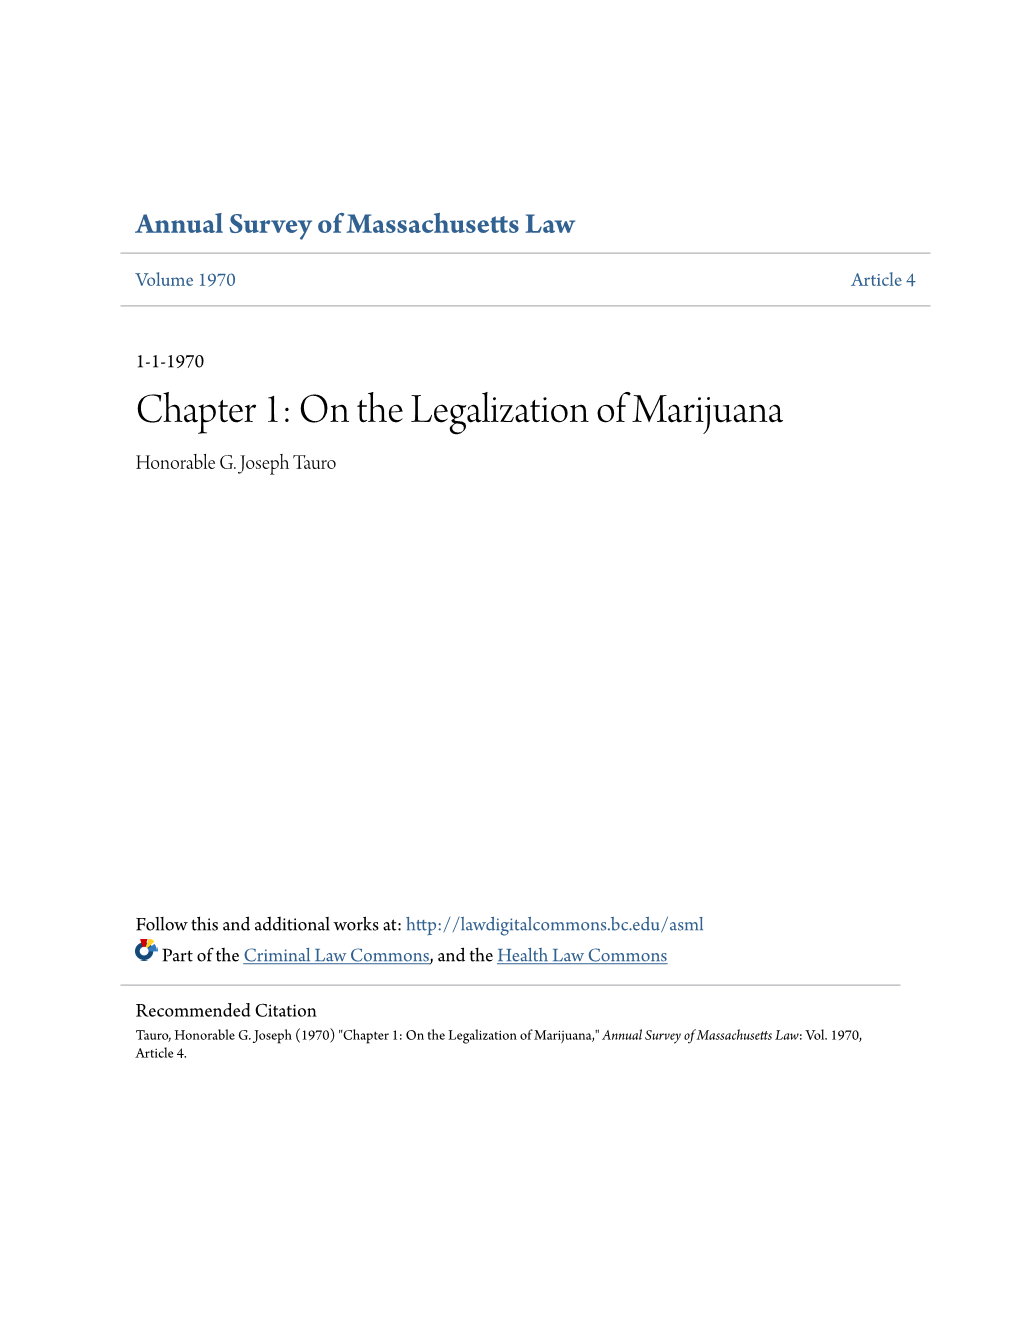 Chapter 1: on the Legalization of Marijuana Honorable G